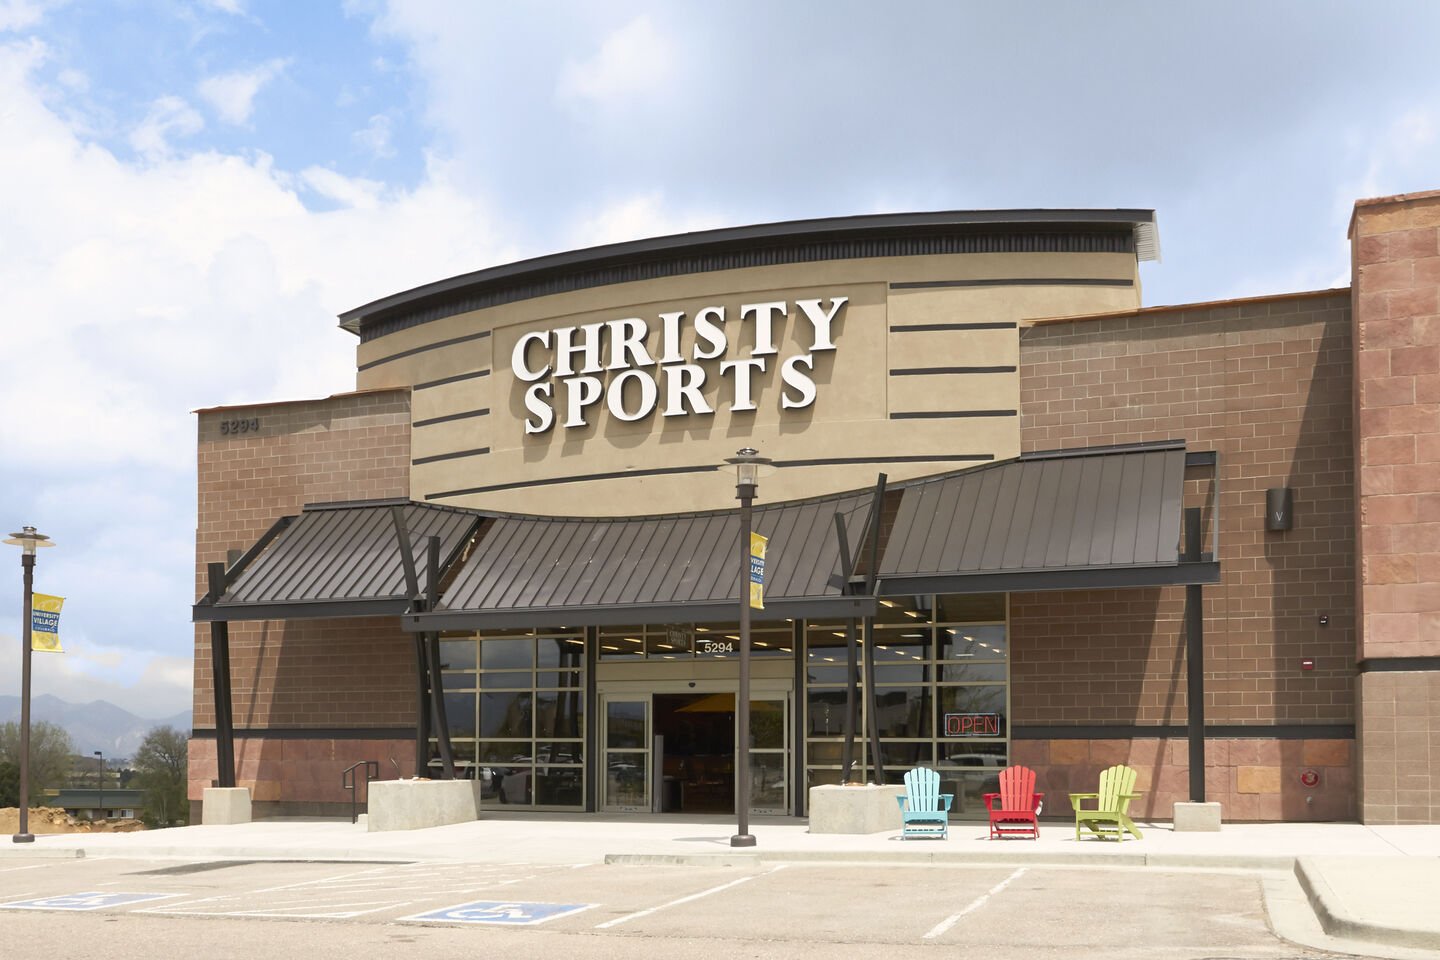 christy sports ski and snowboard rental location in colorado springs